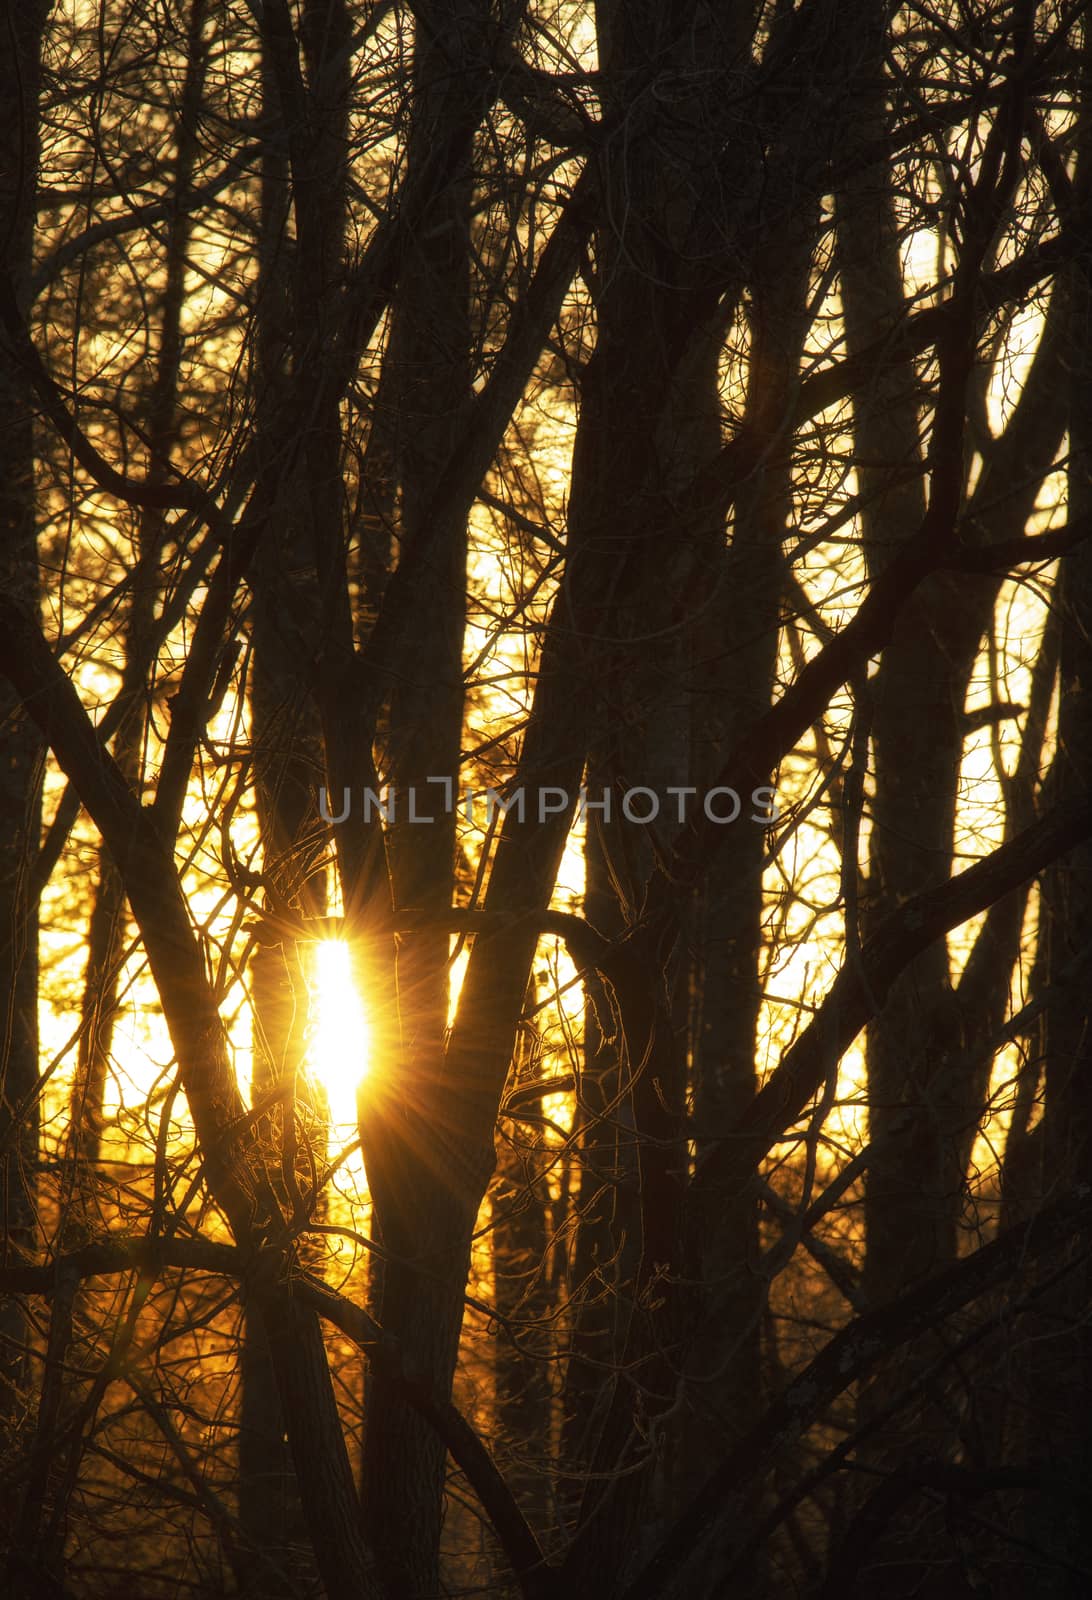 Sunset Through the Trees by CharlieFloyd